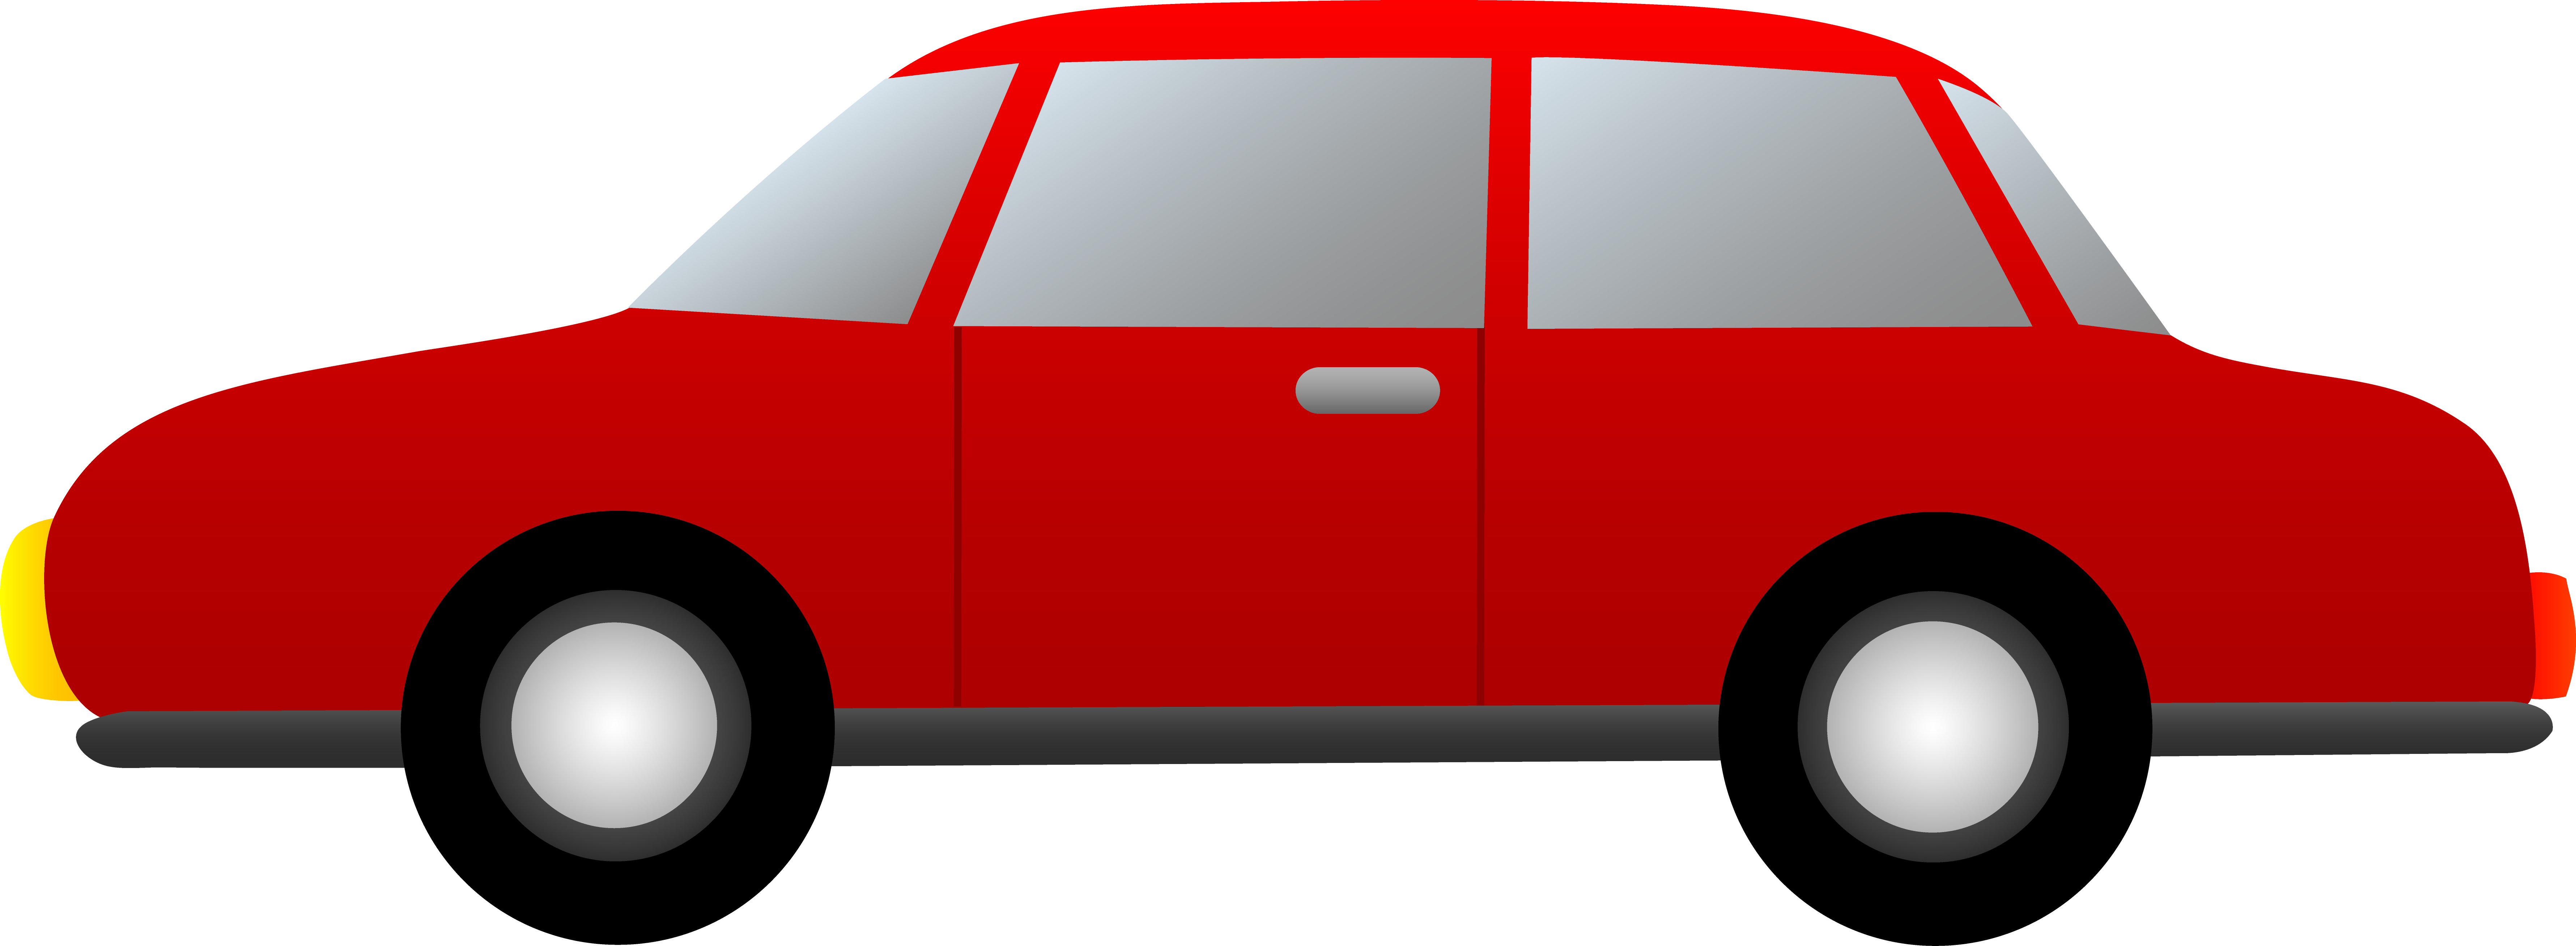 Red car clipart no backgroud